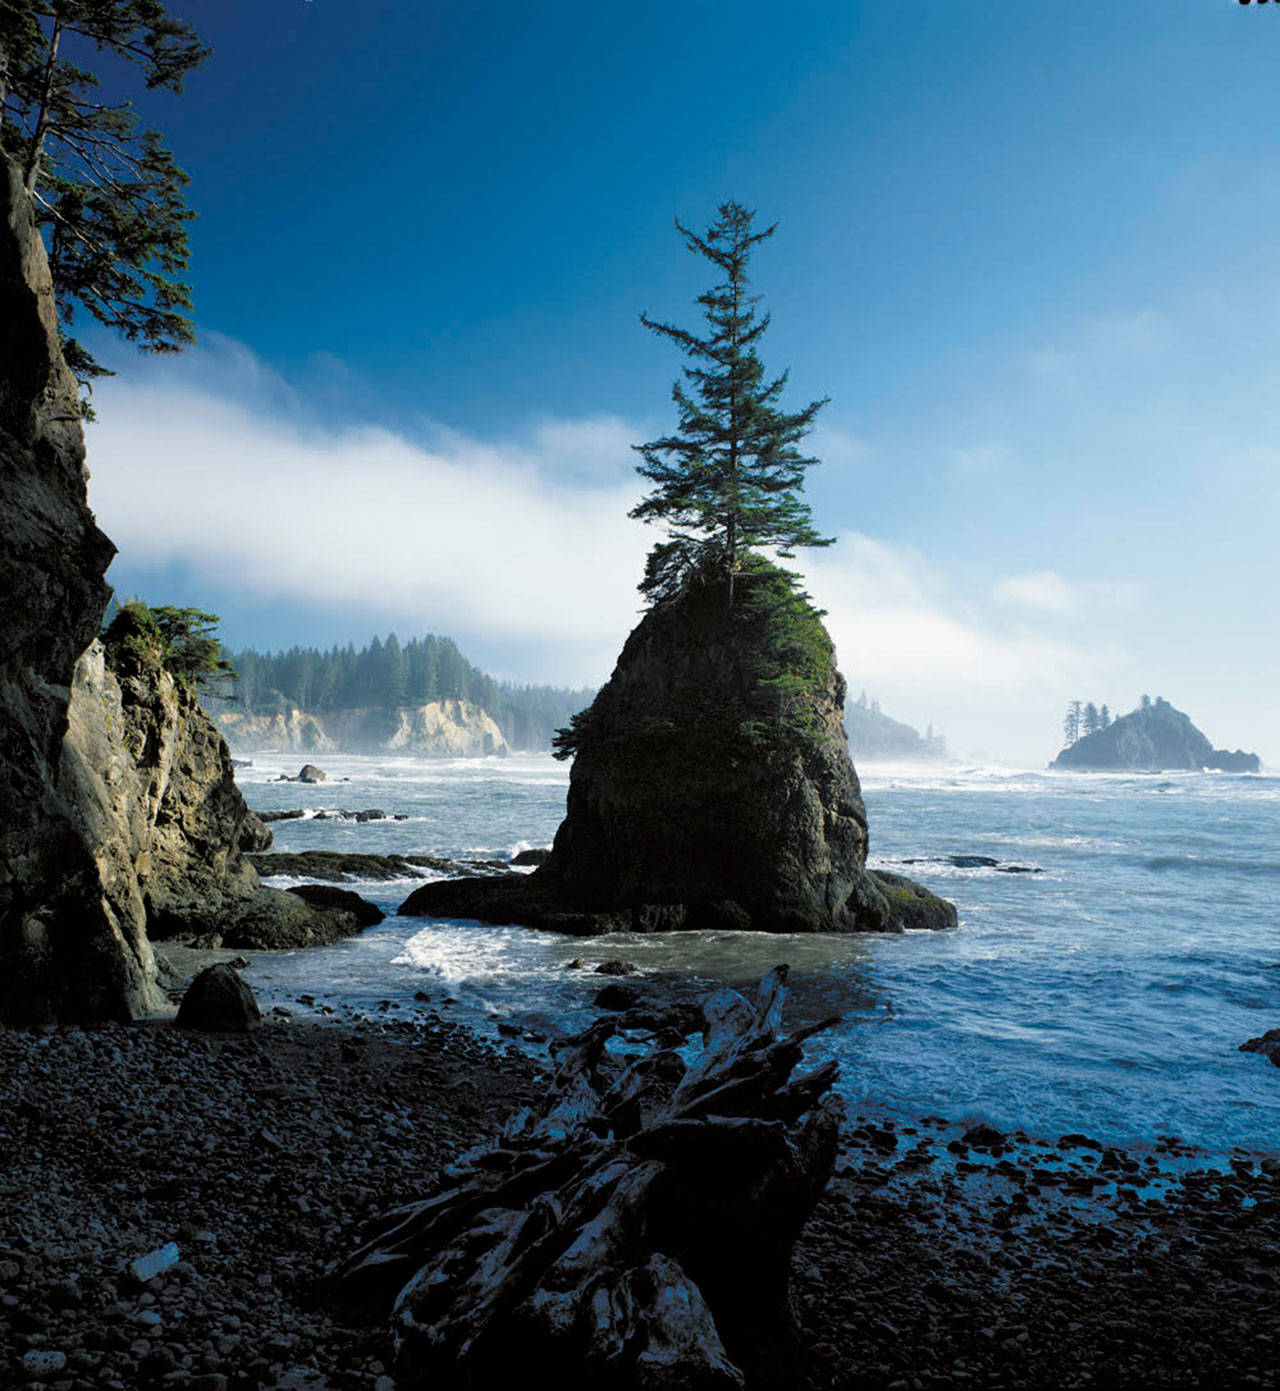 An image of the Pacific Ocean coastline near Taylor Point, just south of La Push, adorns Ross Hamilton’s 2020 calendar for the month of September. Photo by Ross Hamilton